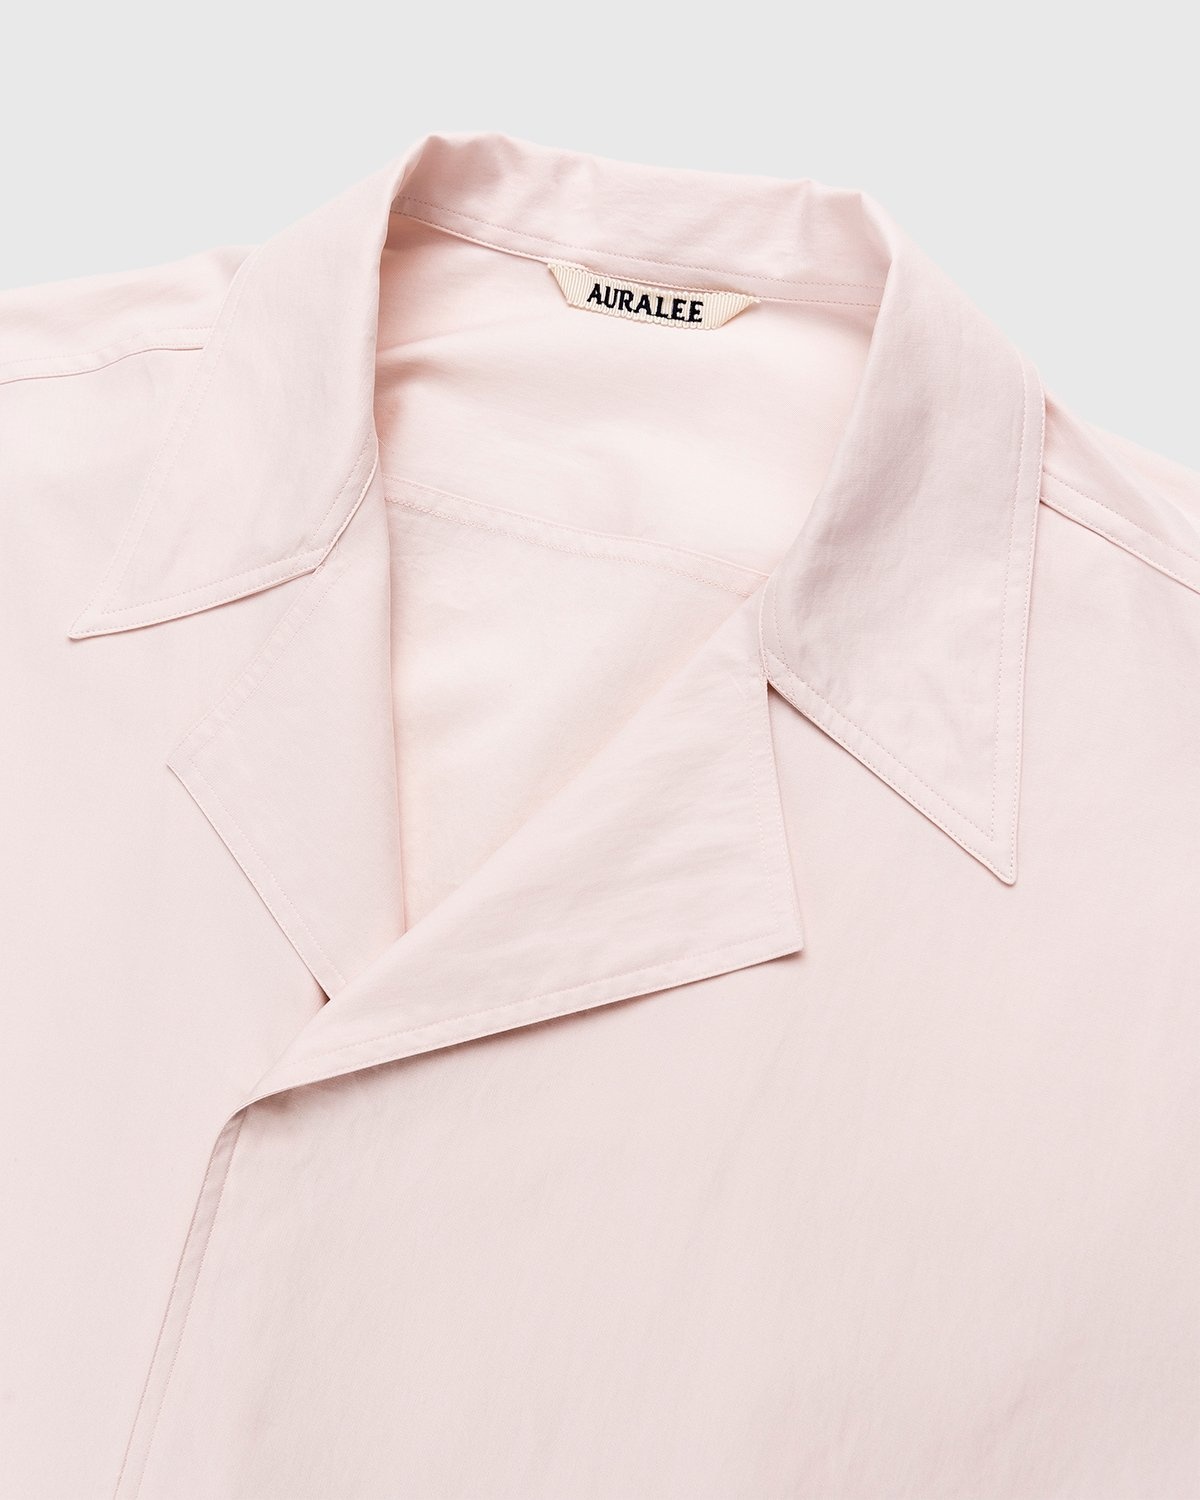 Auralee – Washed Finx Twill Pullover Shirt Light Pink - Longsleeve Shirts - Pink - Image 5